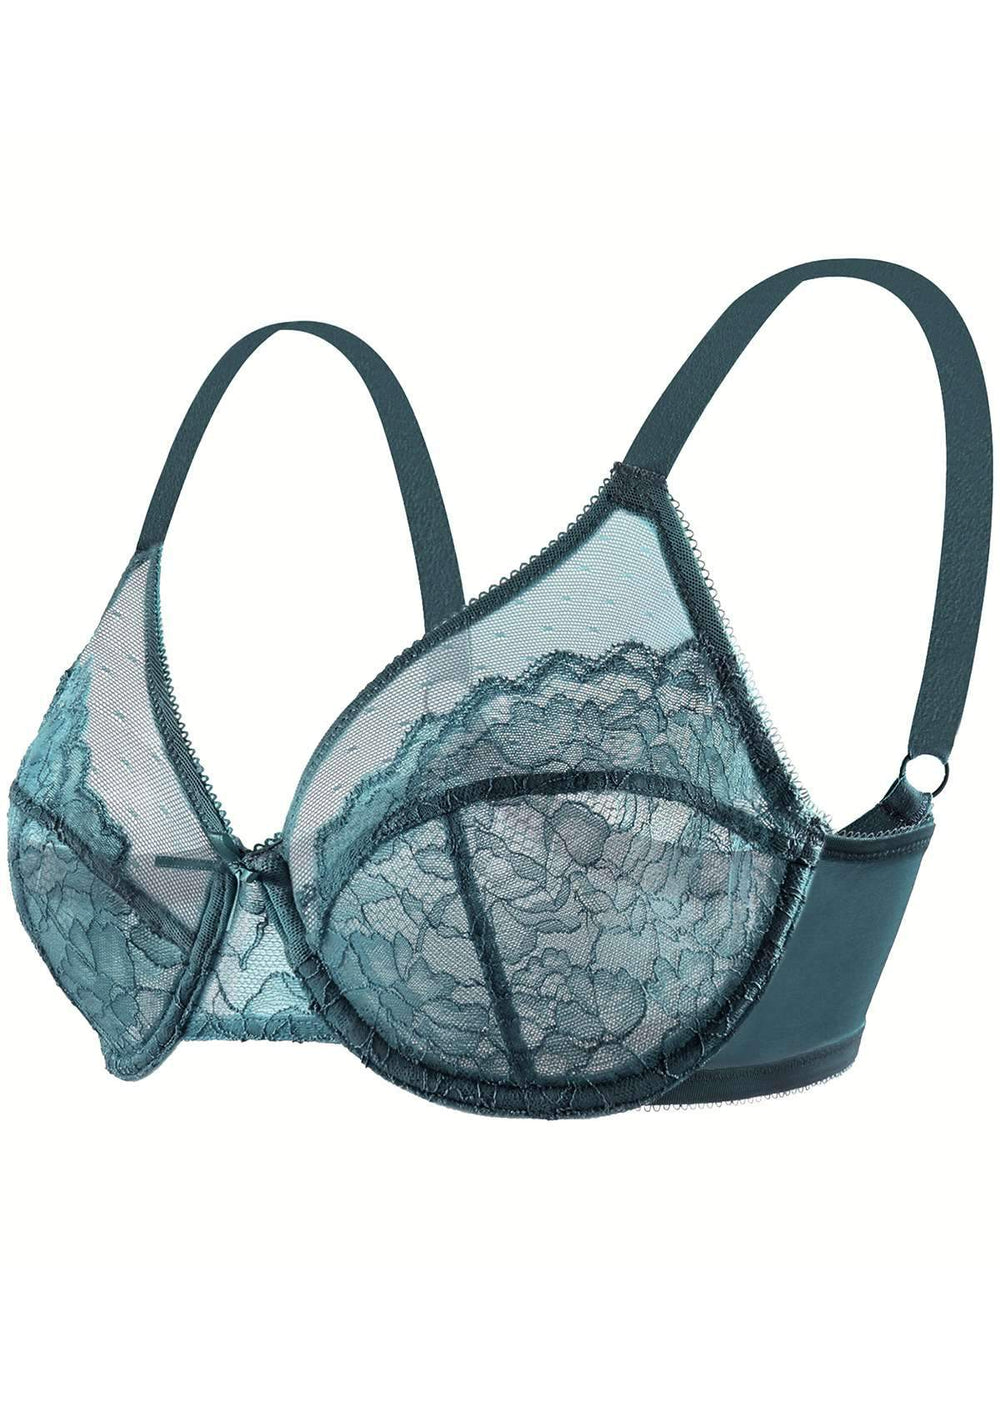 ROYAL CREATIONS NEW ARRIVAL COTTON BRA 32 TO 44 SIZE BRA ALSO BIG/LARGE  SIZES